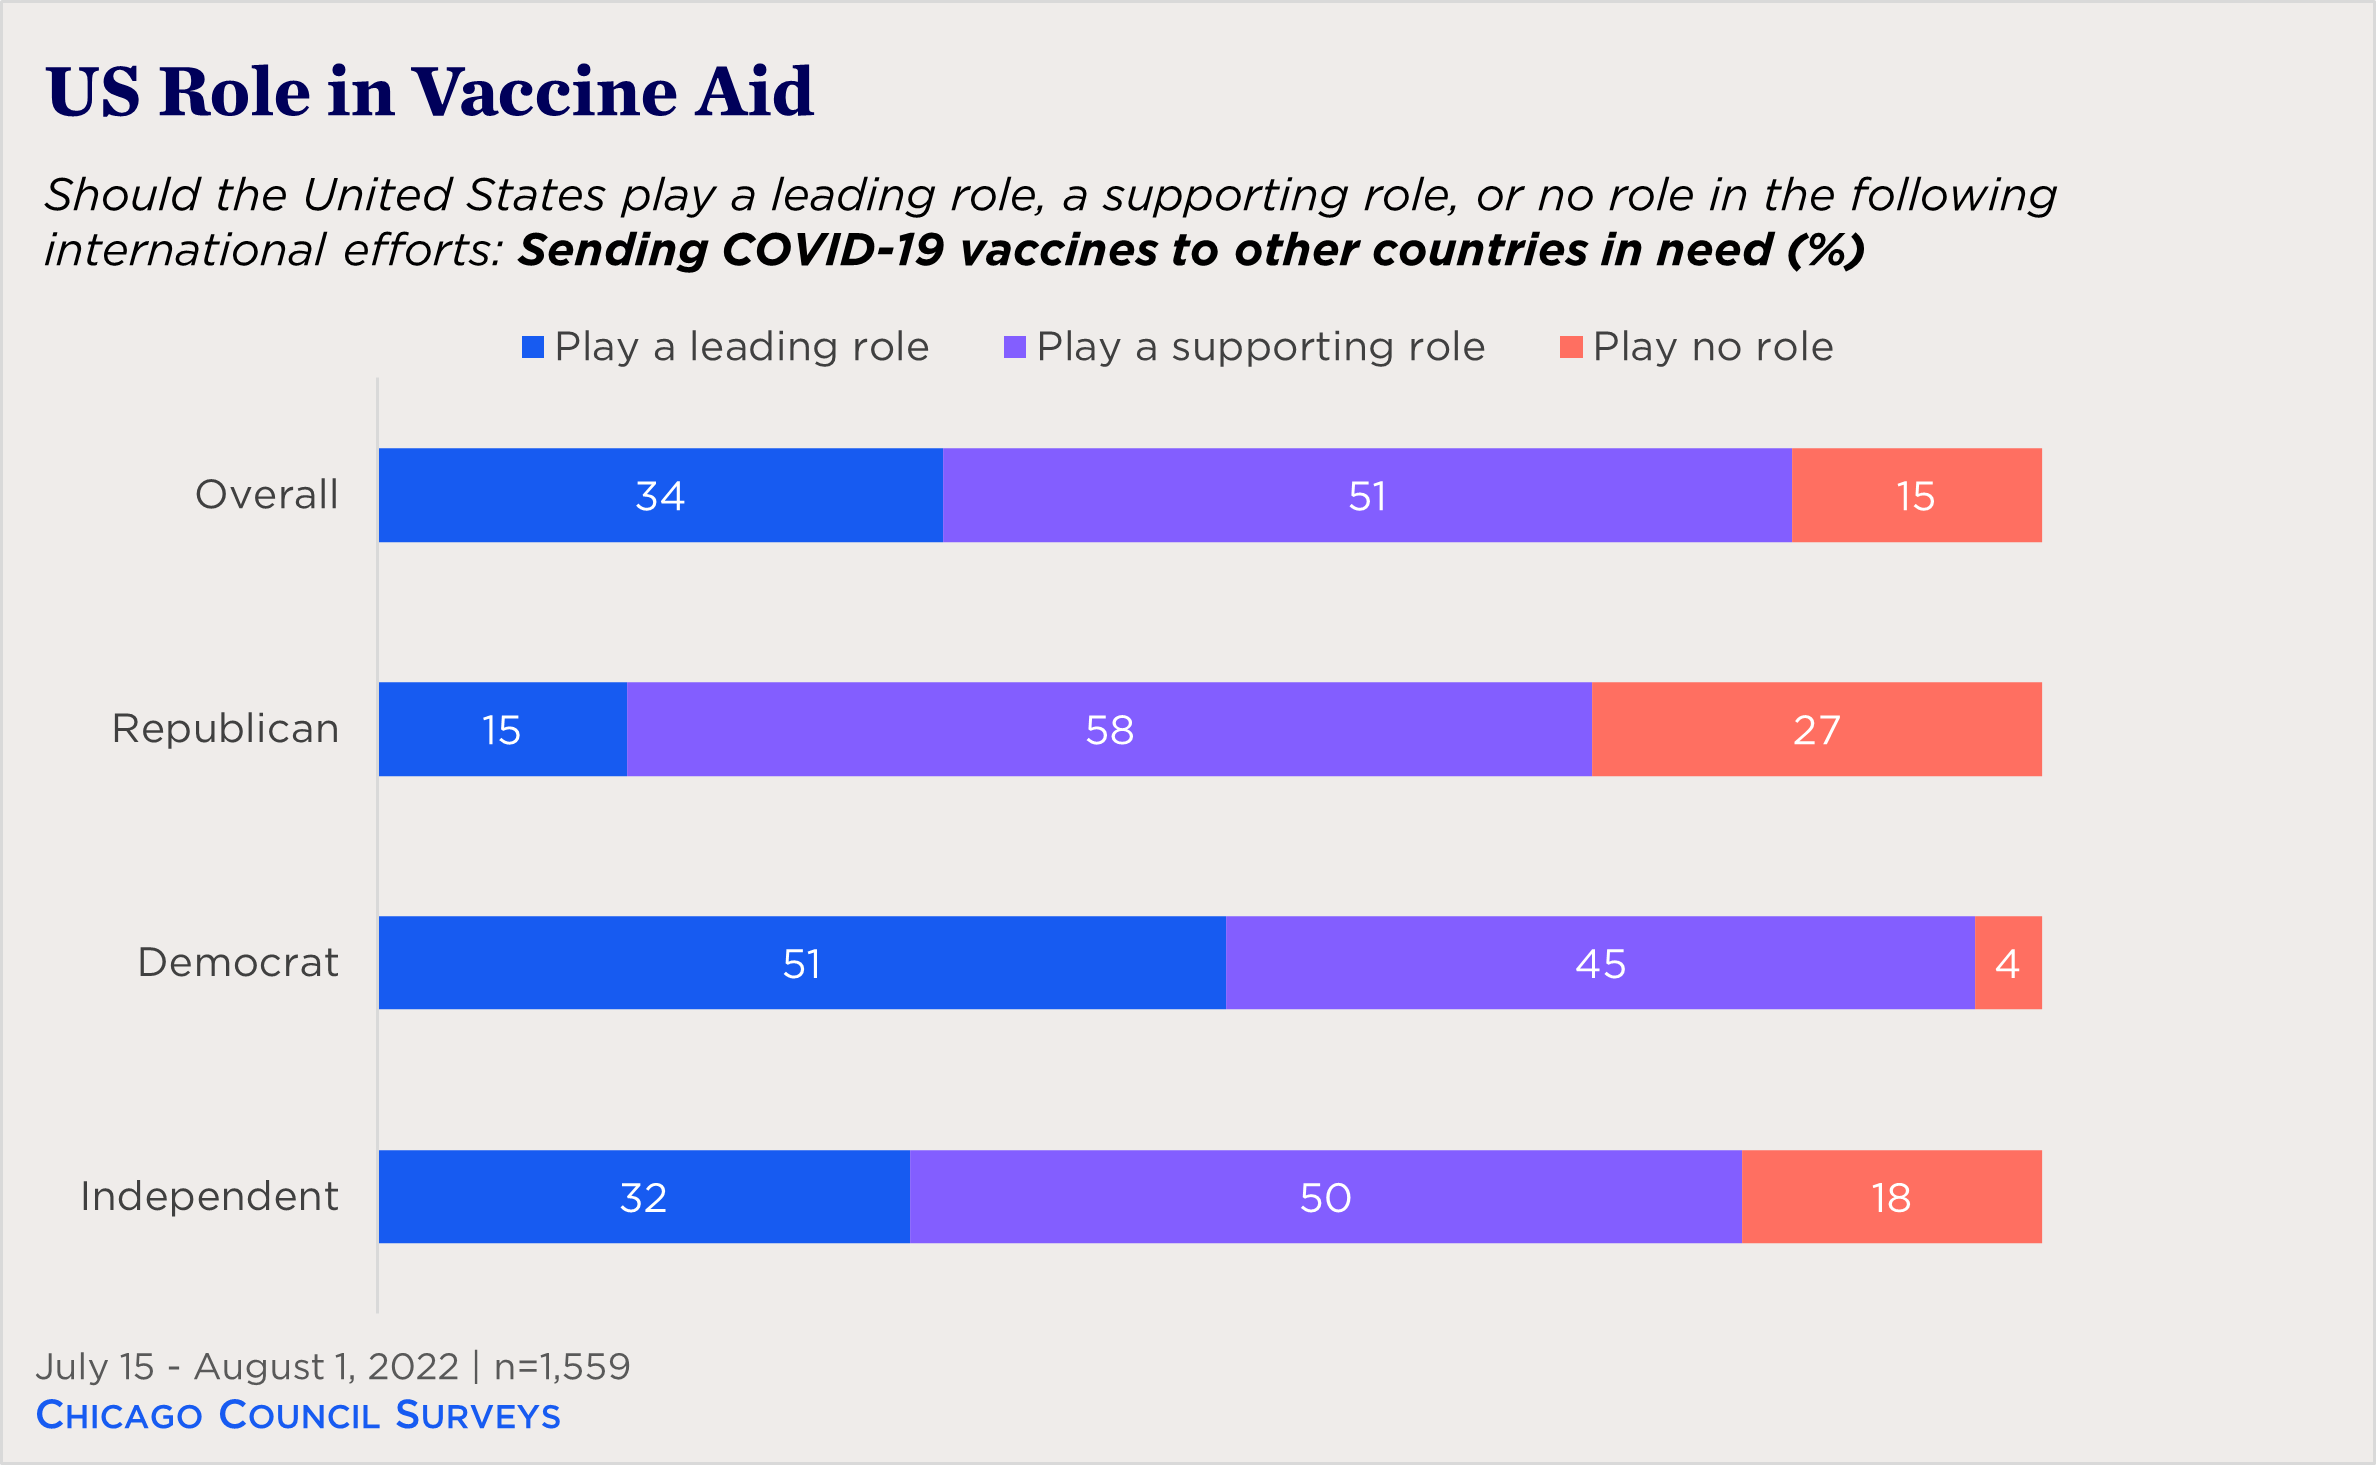 bar chart showing view on US role in vaccine aid